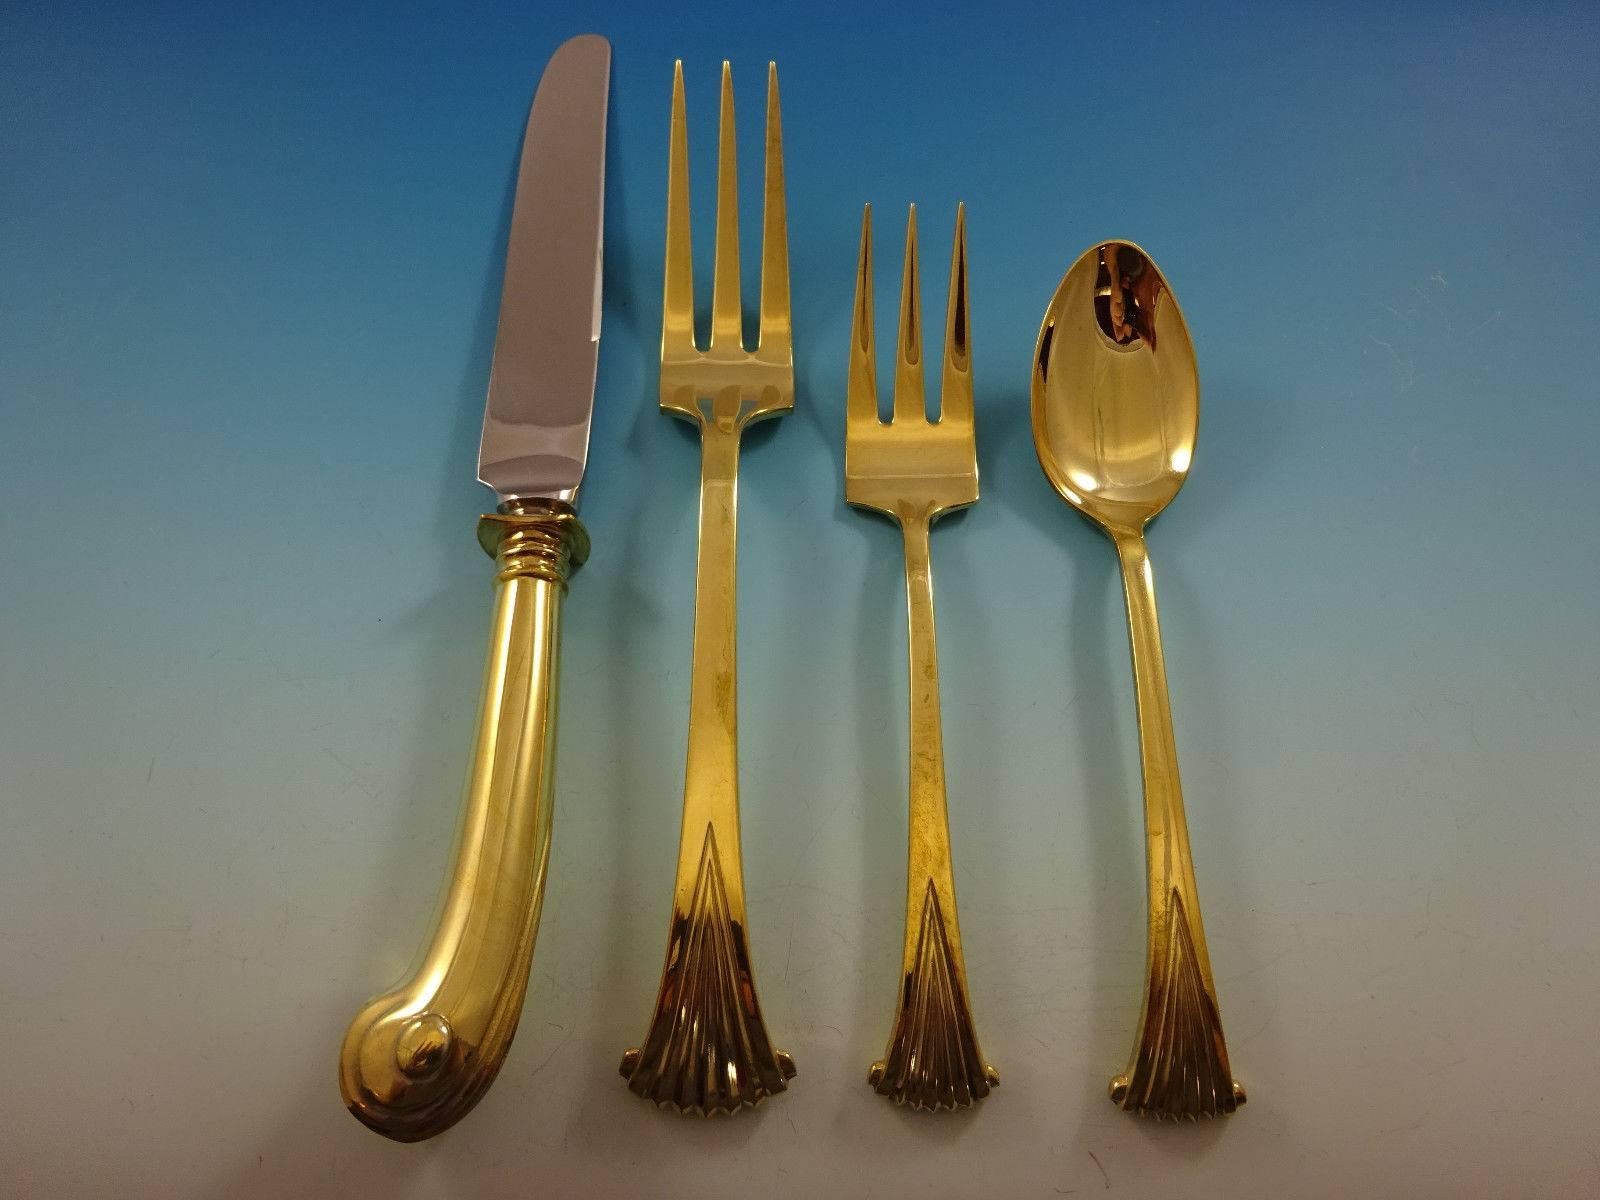 Add some luxe to your life with this fabulous Onslow Gold by Tuttle sterling silver flatware set of 32 pieces. Gold flatware is on trend and makes a bold statement on your table. 

This set is vermeil (completely gold-washed) and includes:
 
Eight